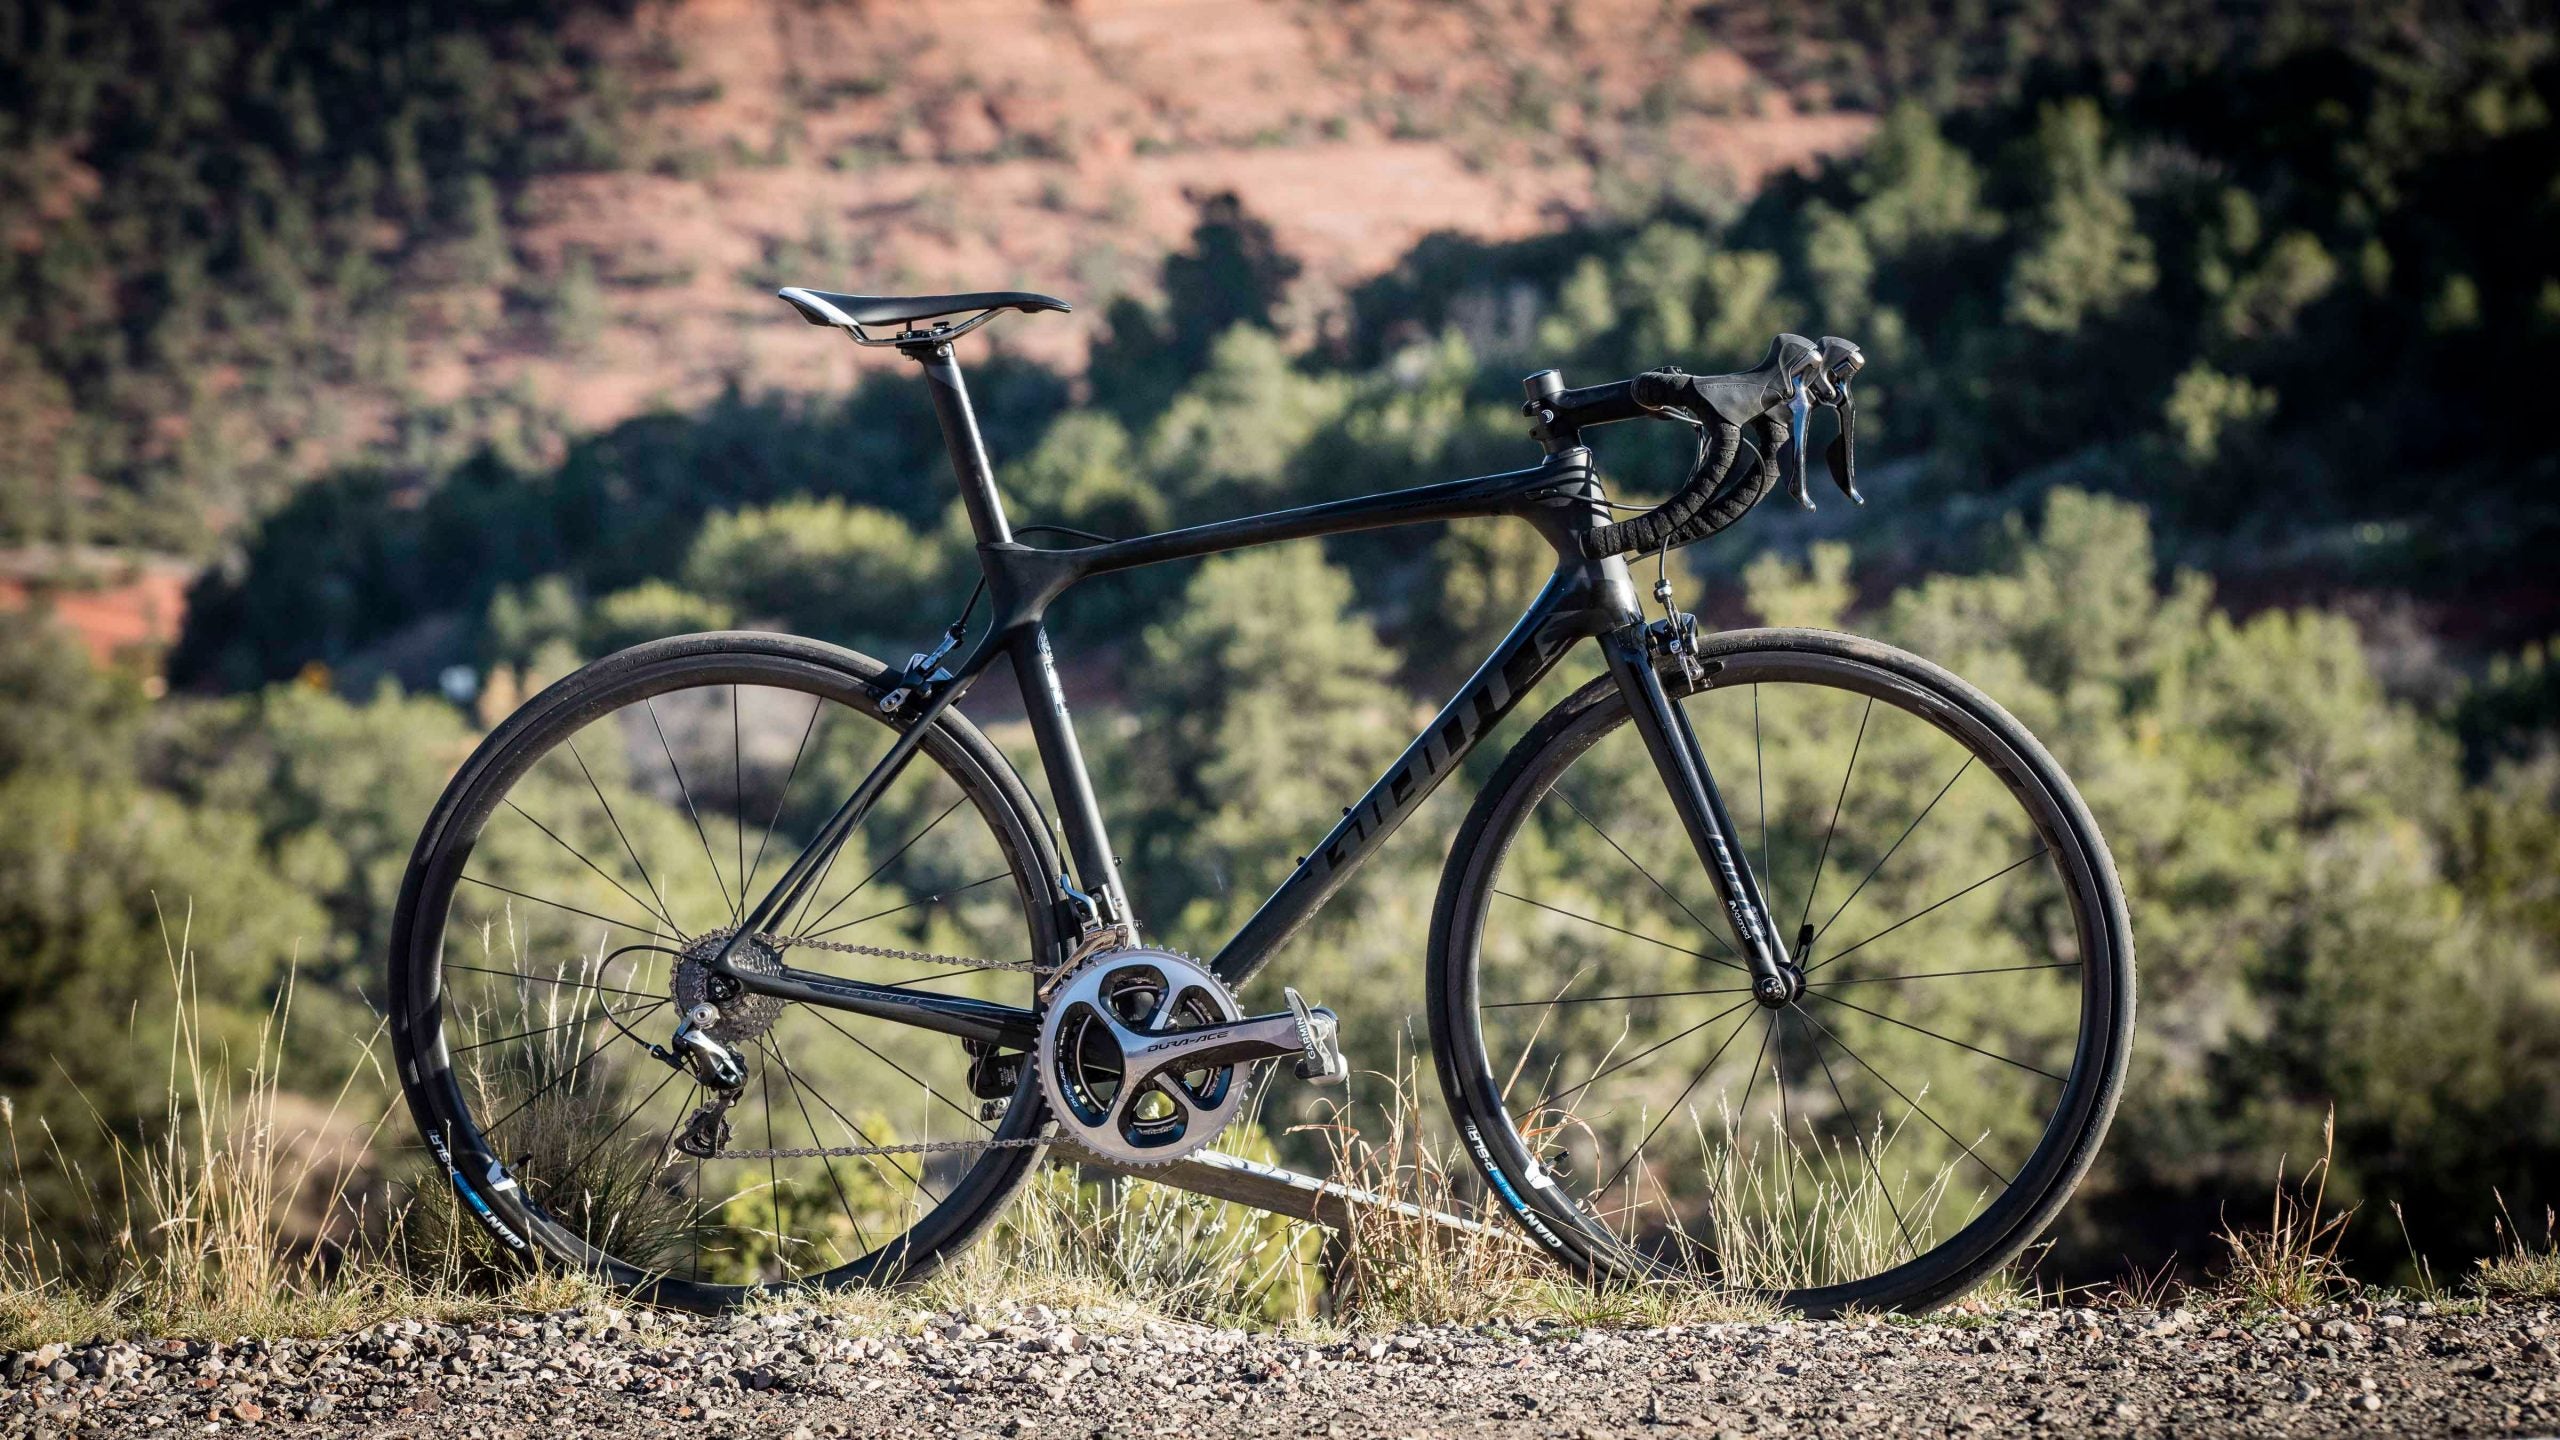 6-Month Test: Giant TCR Advanced Pro 0